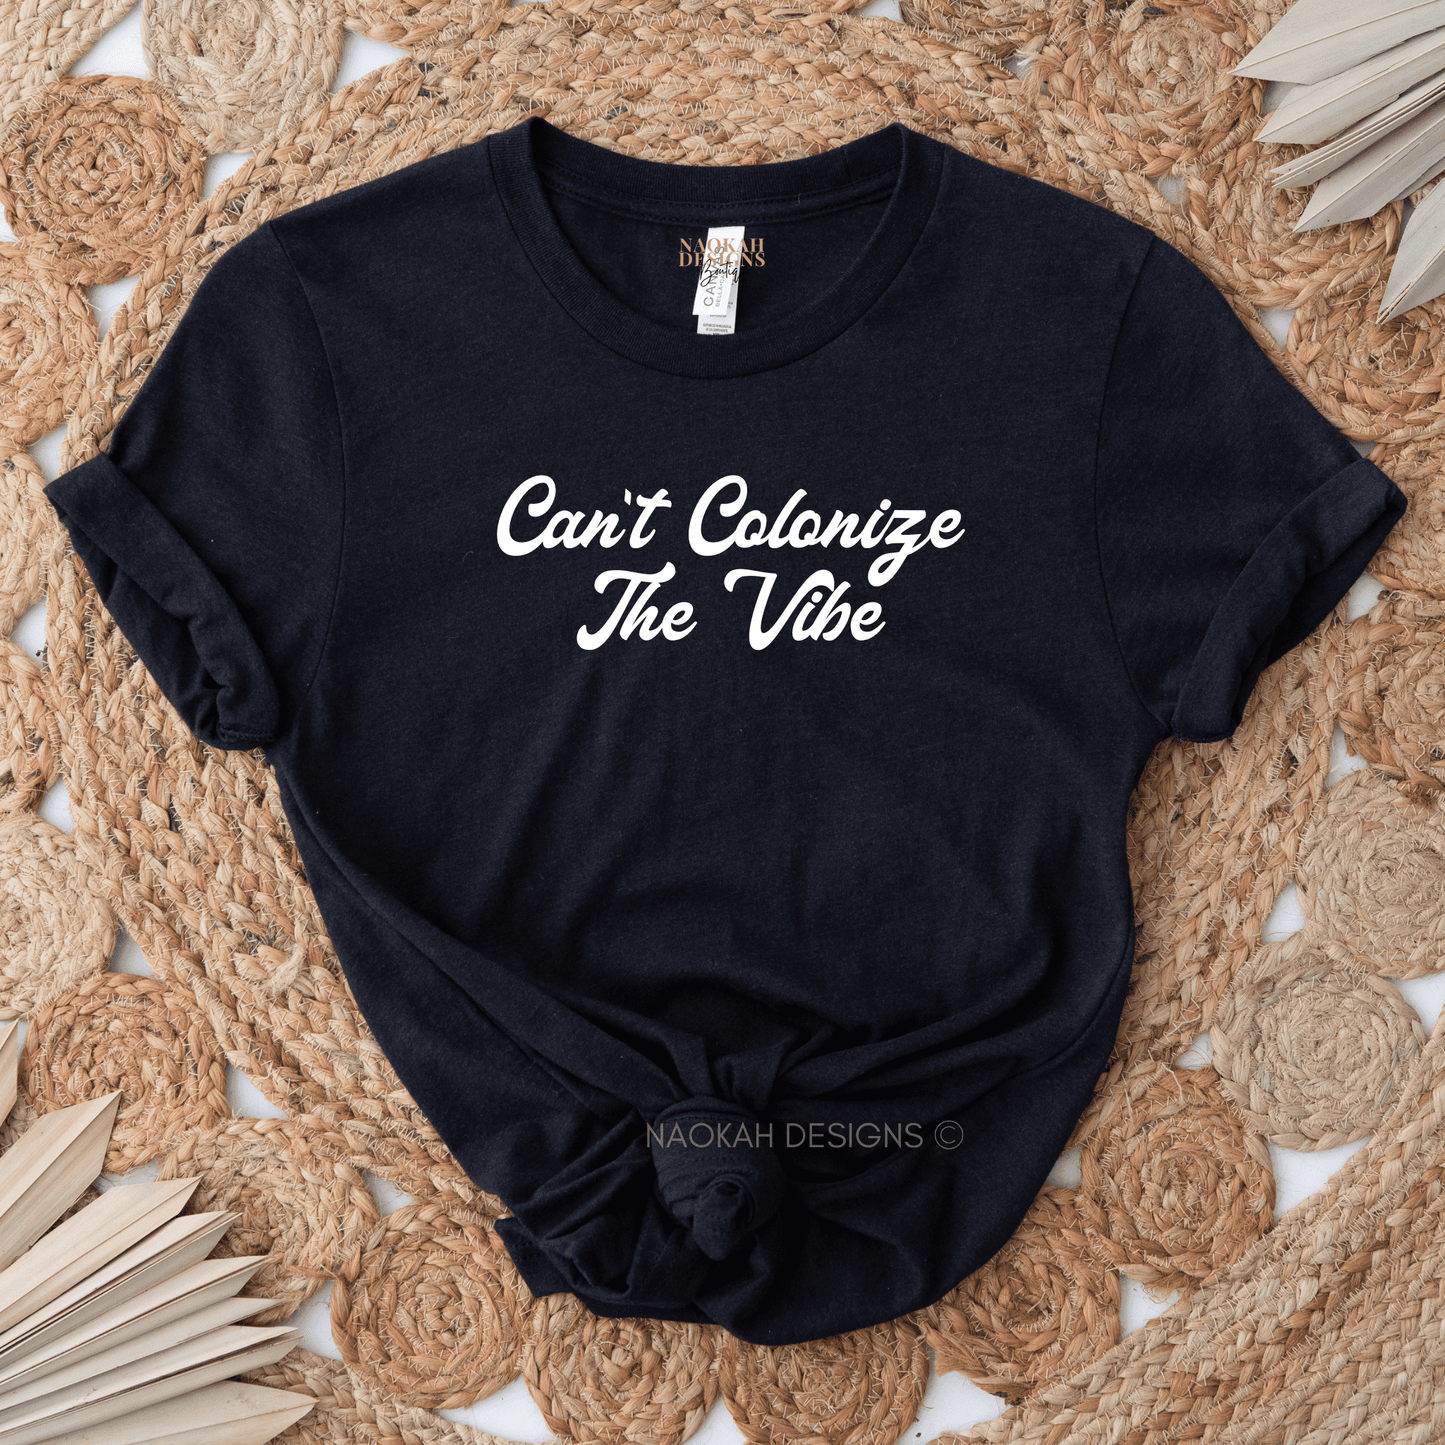 Can’t colonize the vibe shirt, hey colonizer shirt, decolonize shirt, this is native land shirt, Land Back shirt, land back indigenous shirt, native land shirt, no one is illegal on native land shirt, Indigenous pride, resistance, indigenous lives matter shirt, decolonize education shirt, Native shirt, Equal Rights Shirt, Equality, Indigenous AF, Phenomenally Indigenous T-Shirt